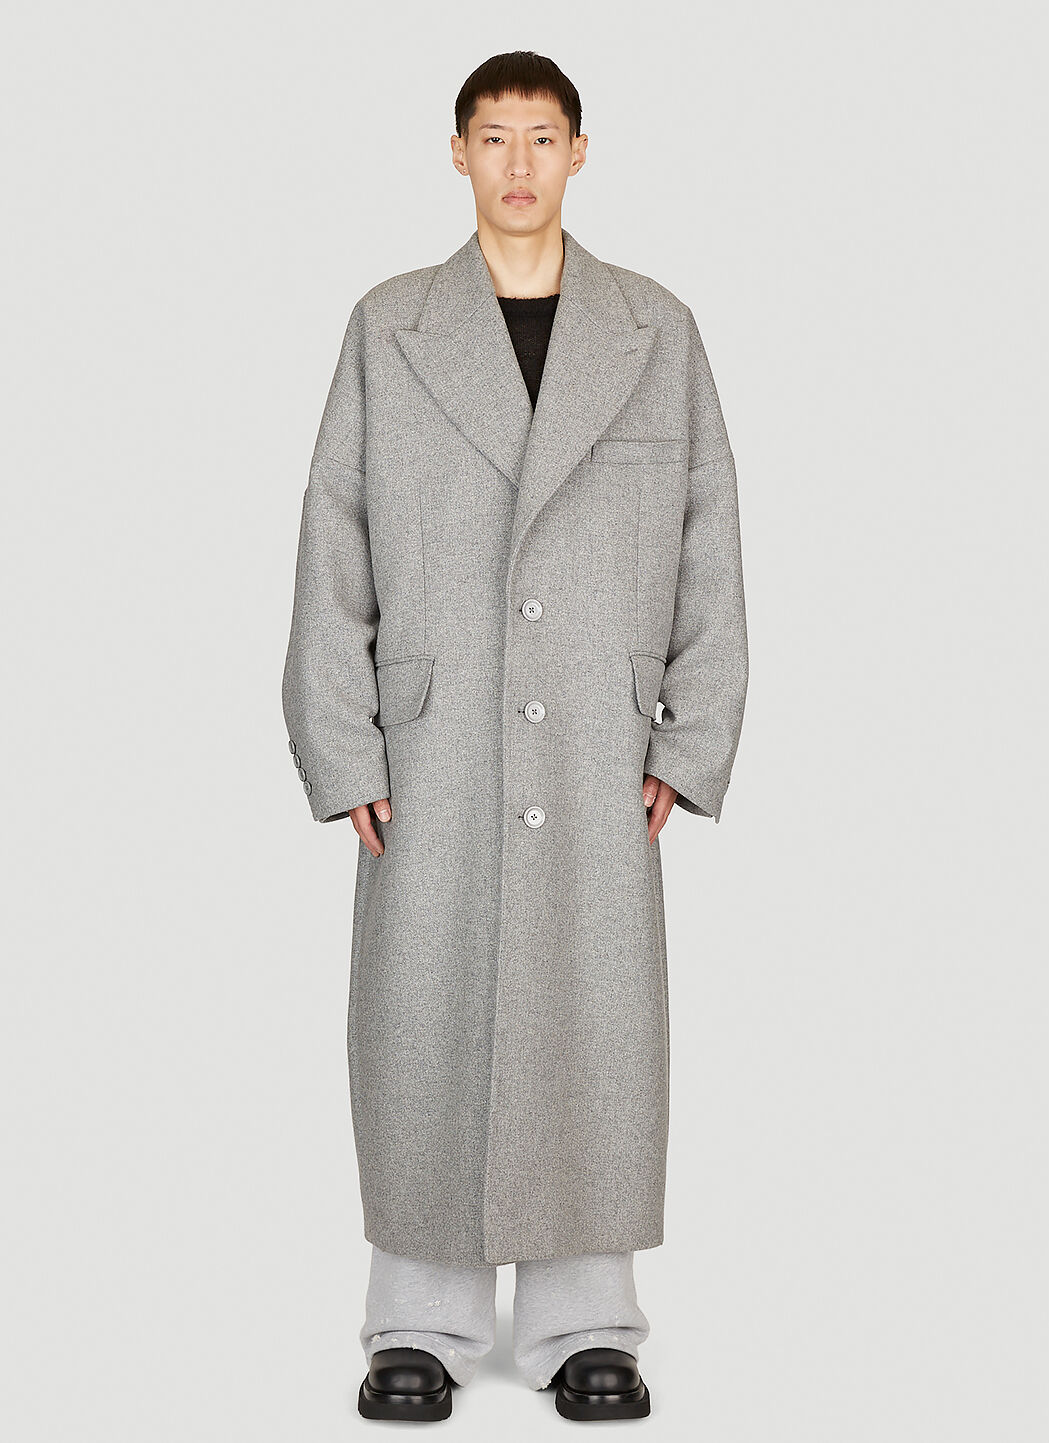 Dolce & Gabbana Double-Breasted Wool Coat Grey dol0154003